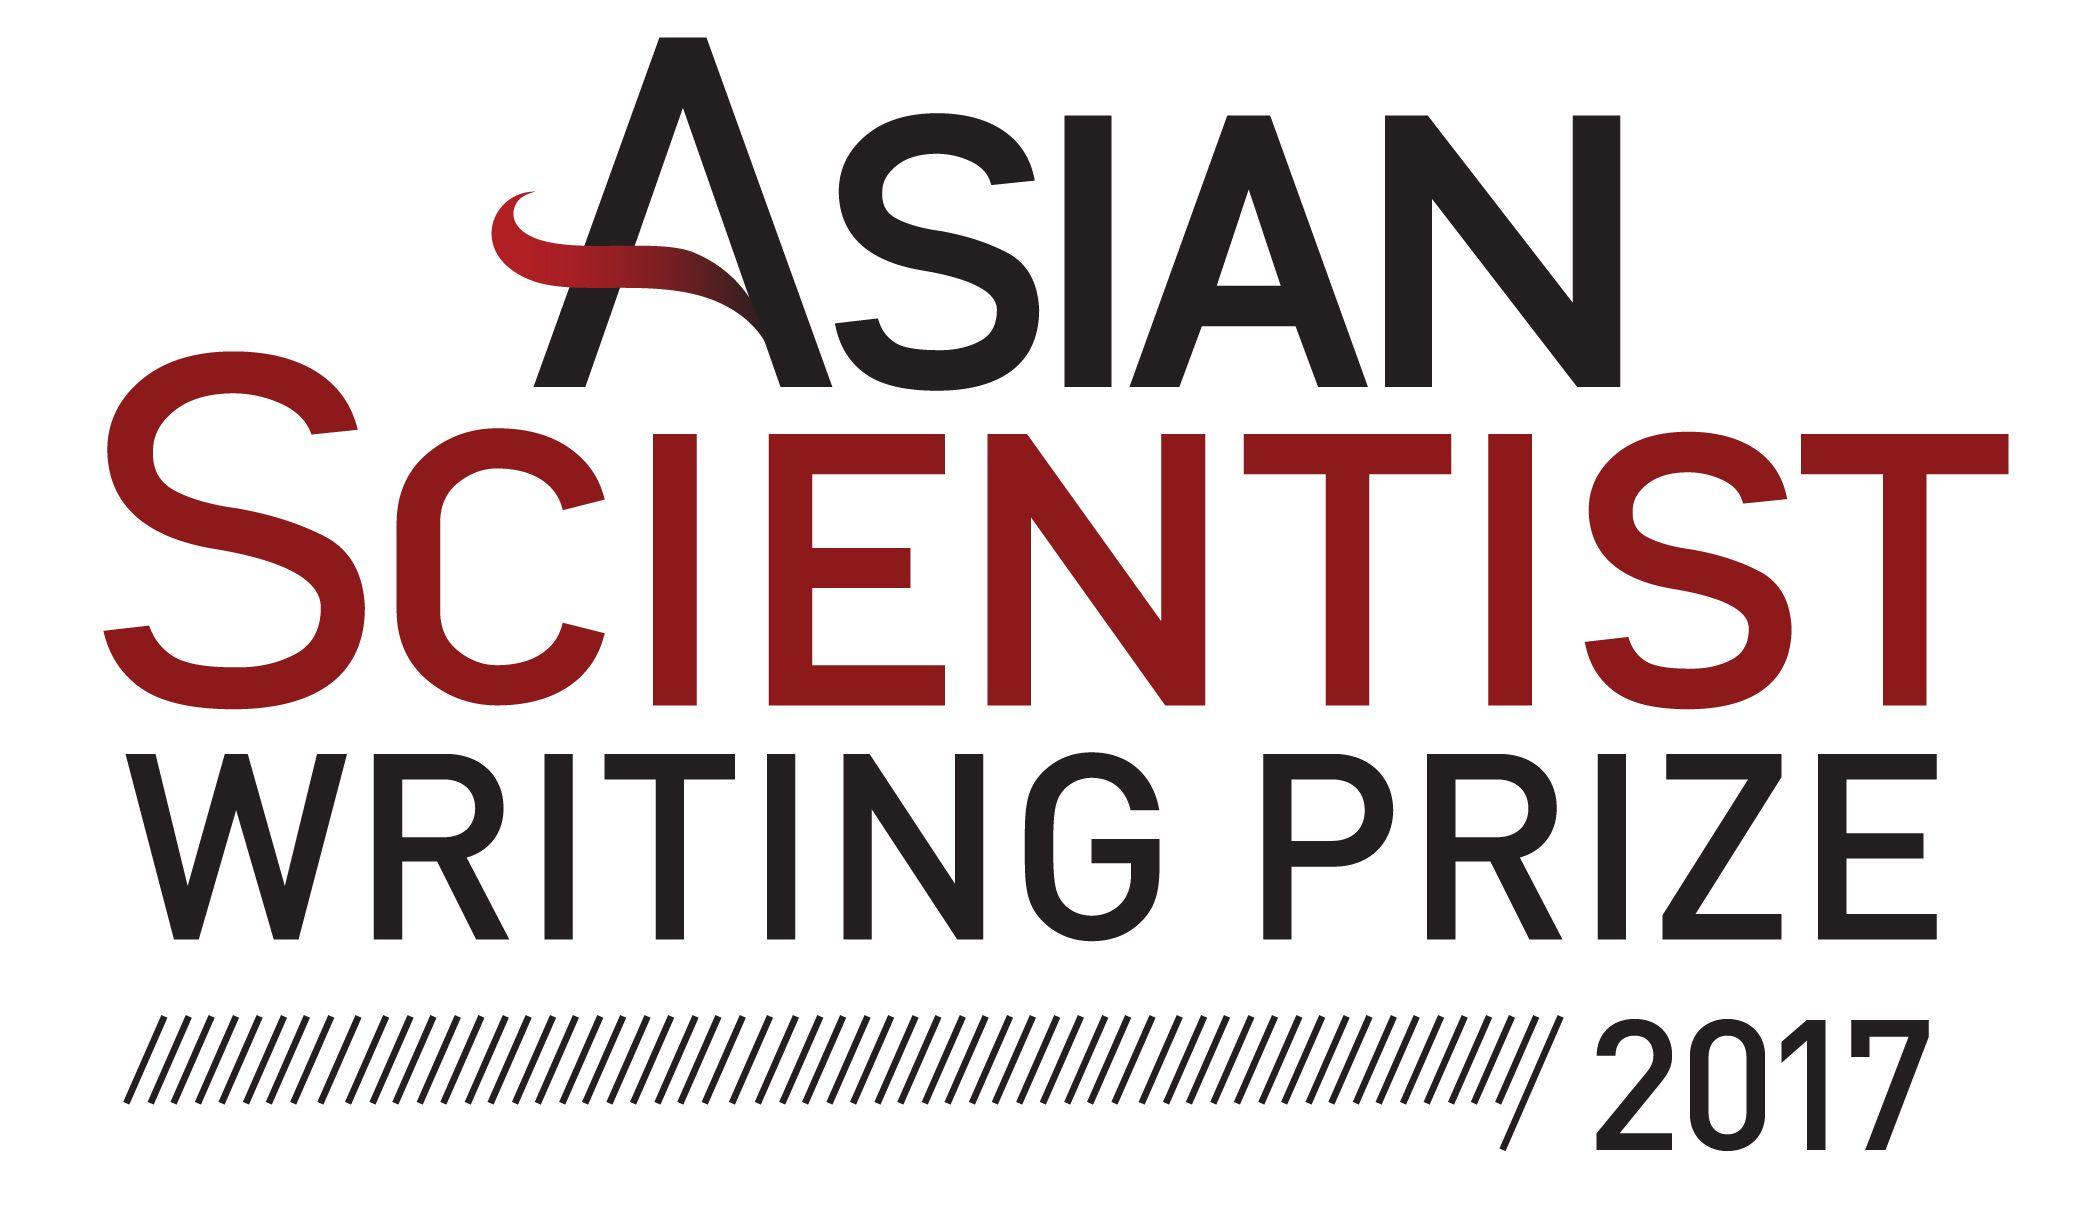 Asian Red Writing Logo - The Asian Scientist Writing Prize 2017 | Asian Scientist Magazine ...